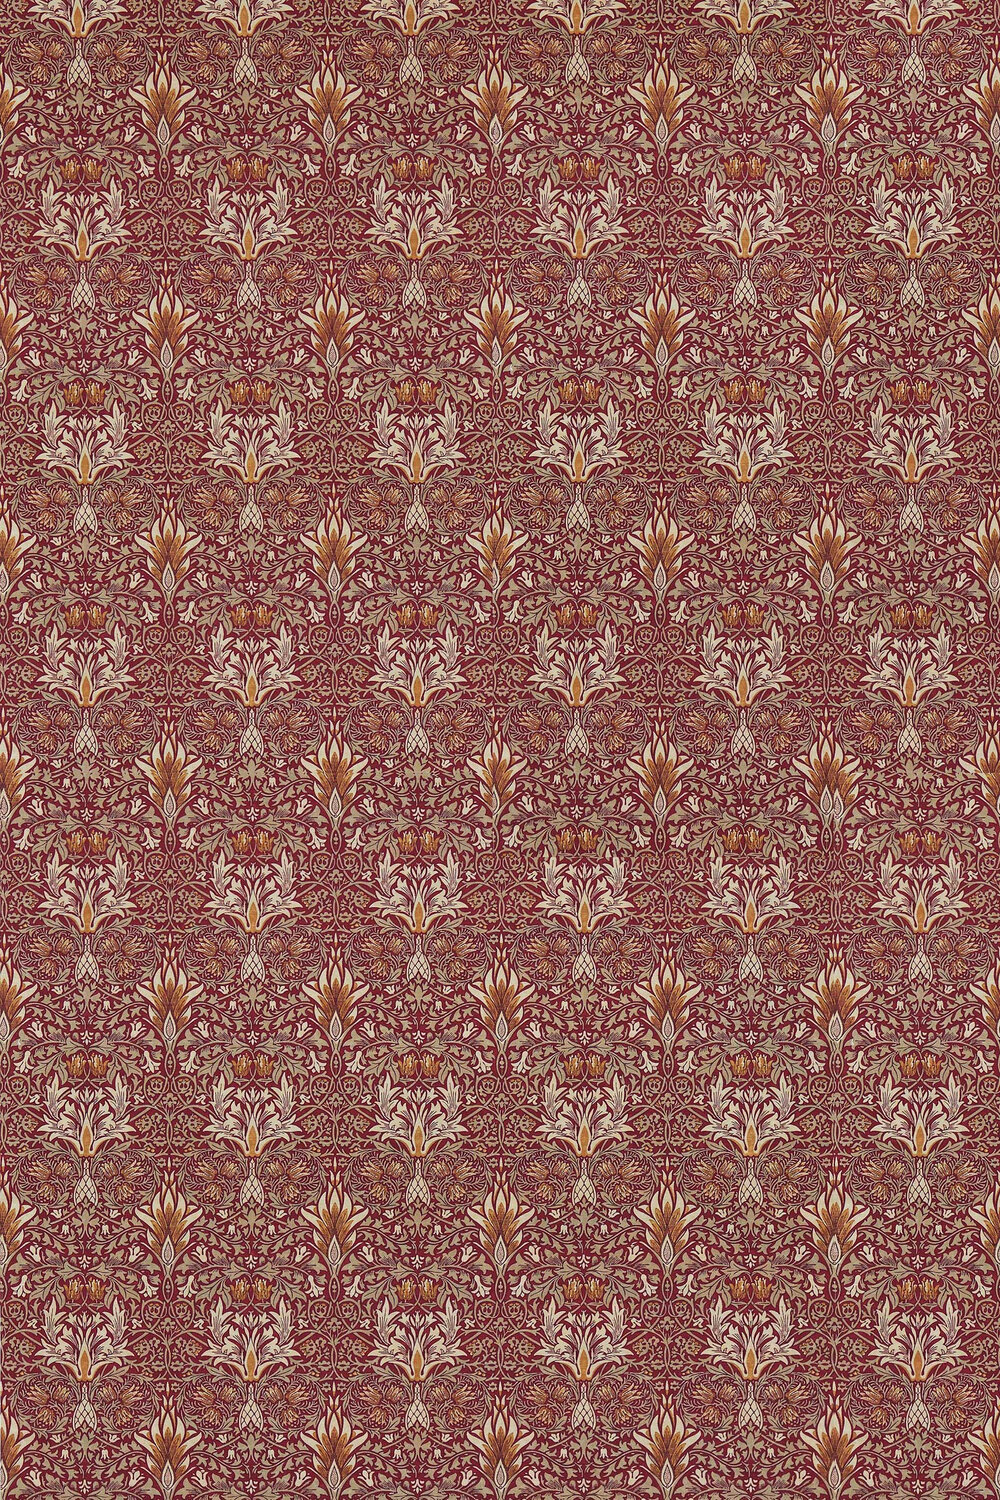 Snakeshead Fabric - Claret / Gold - by Morris